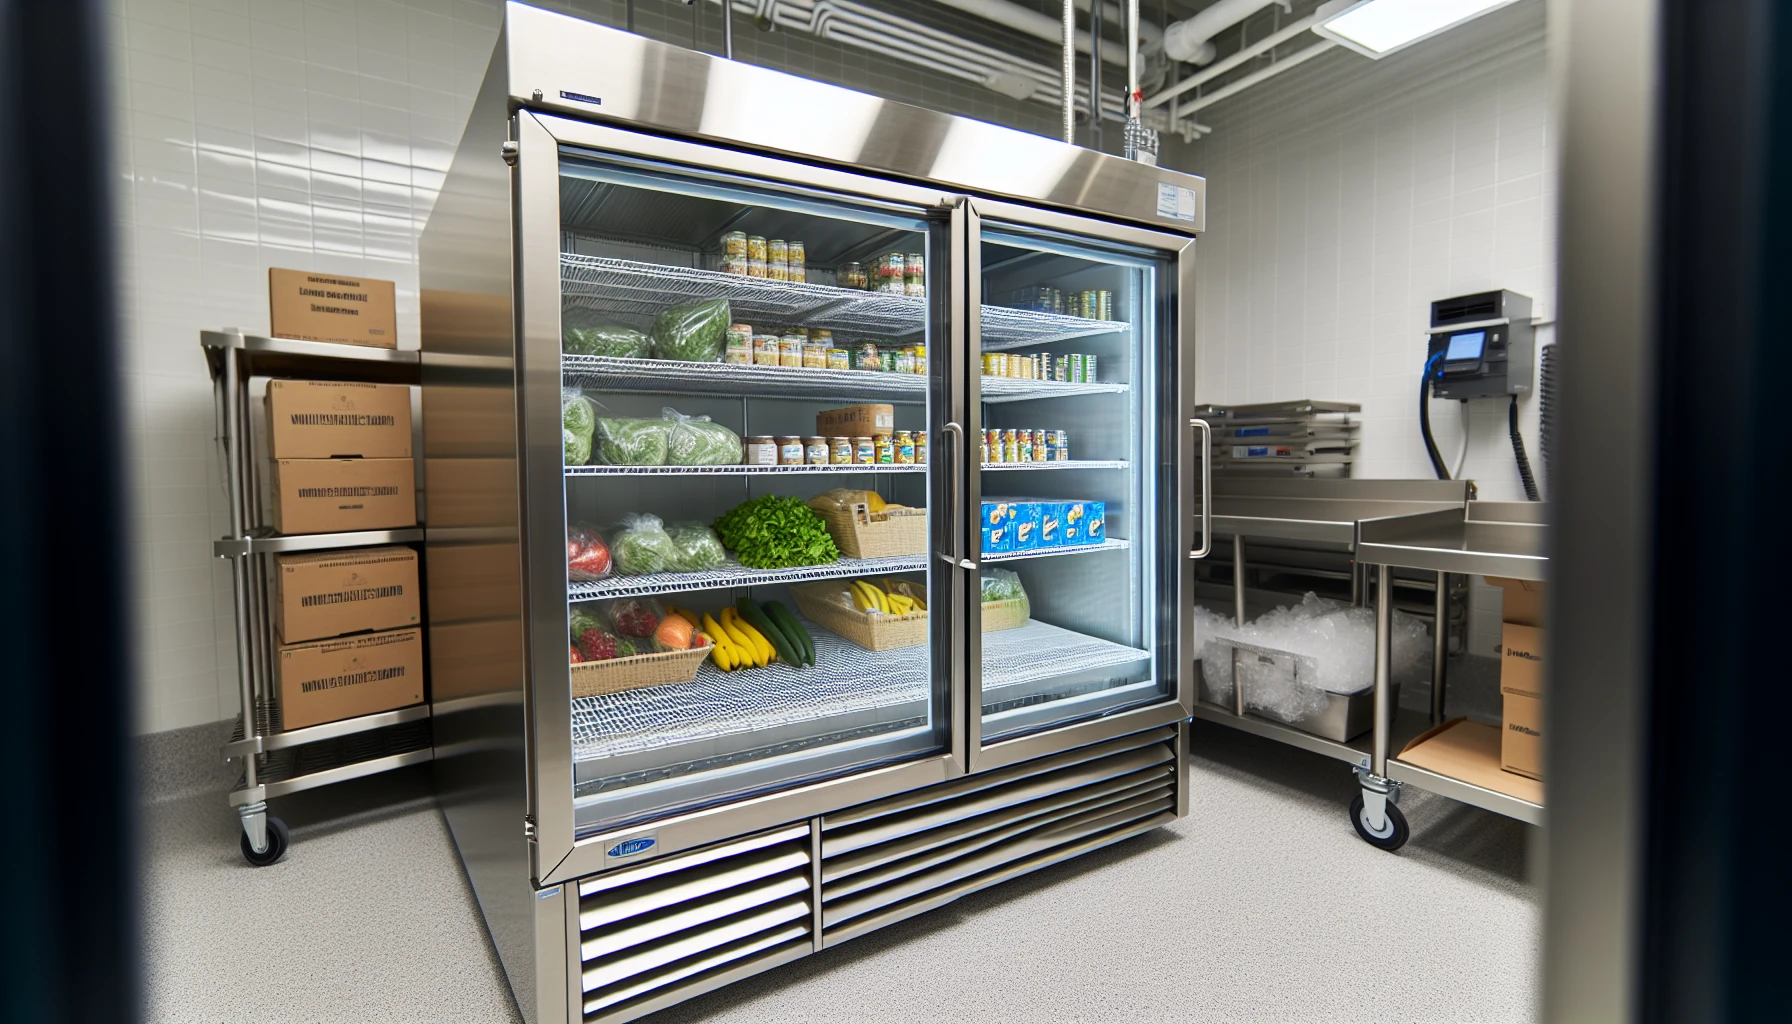 An energy-efficient walk-in cooler as a commercial refrigeration unit